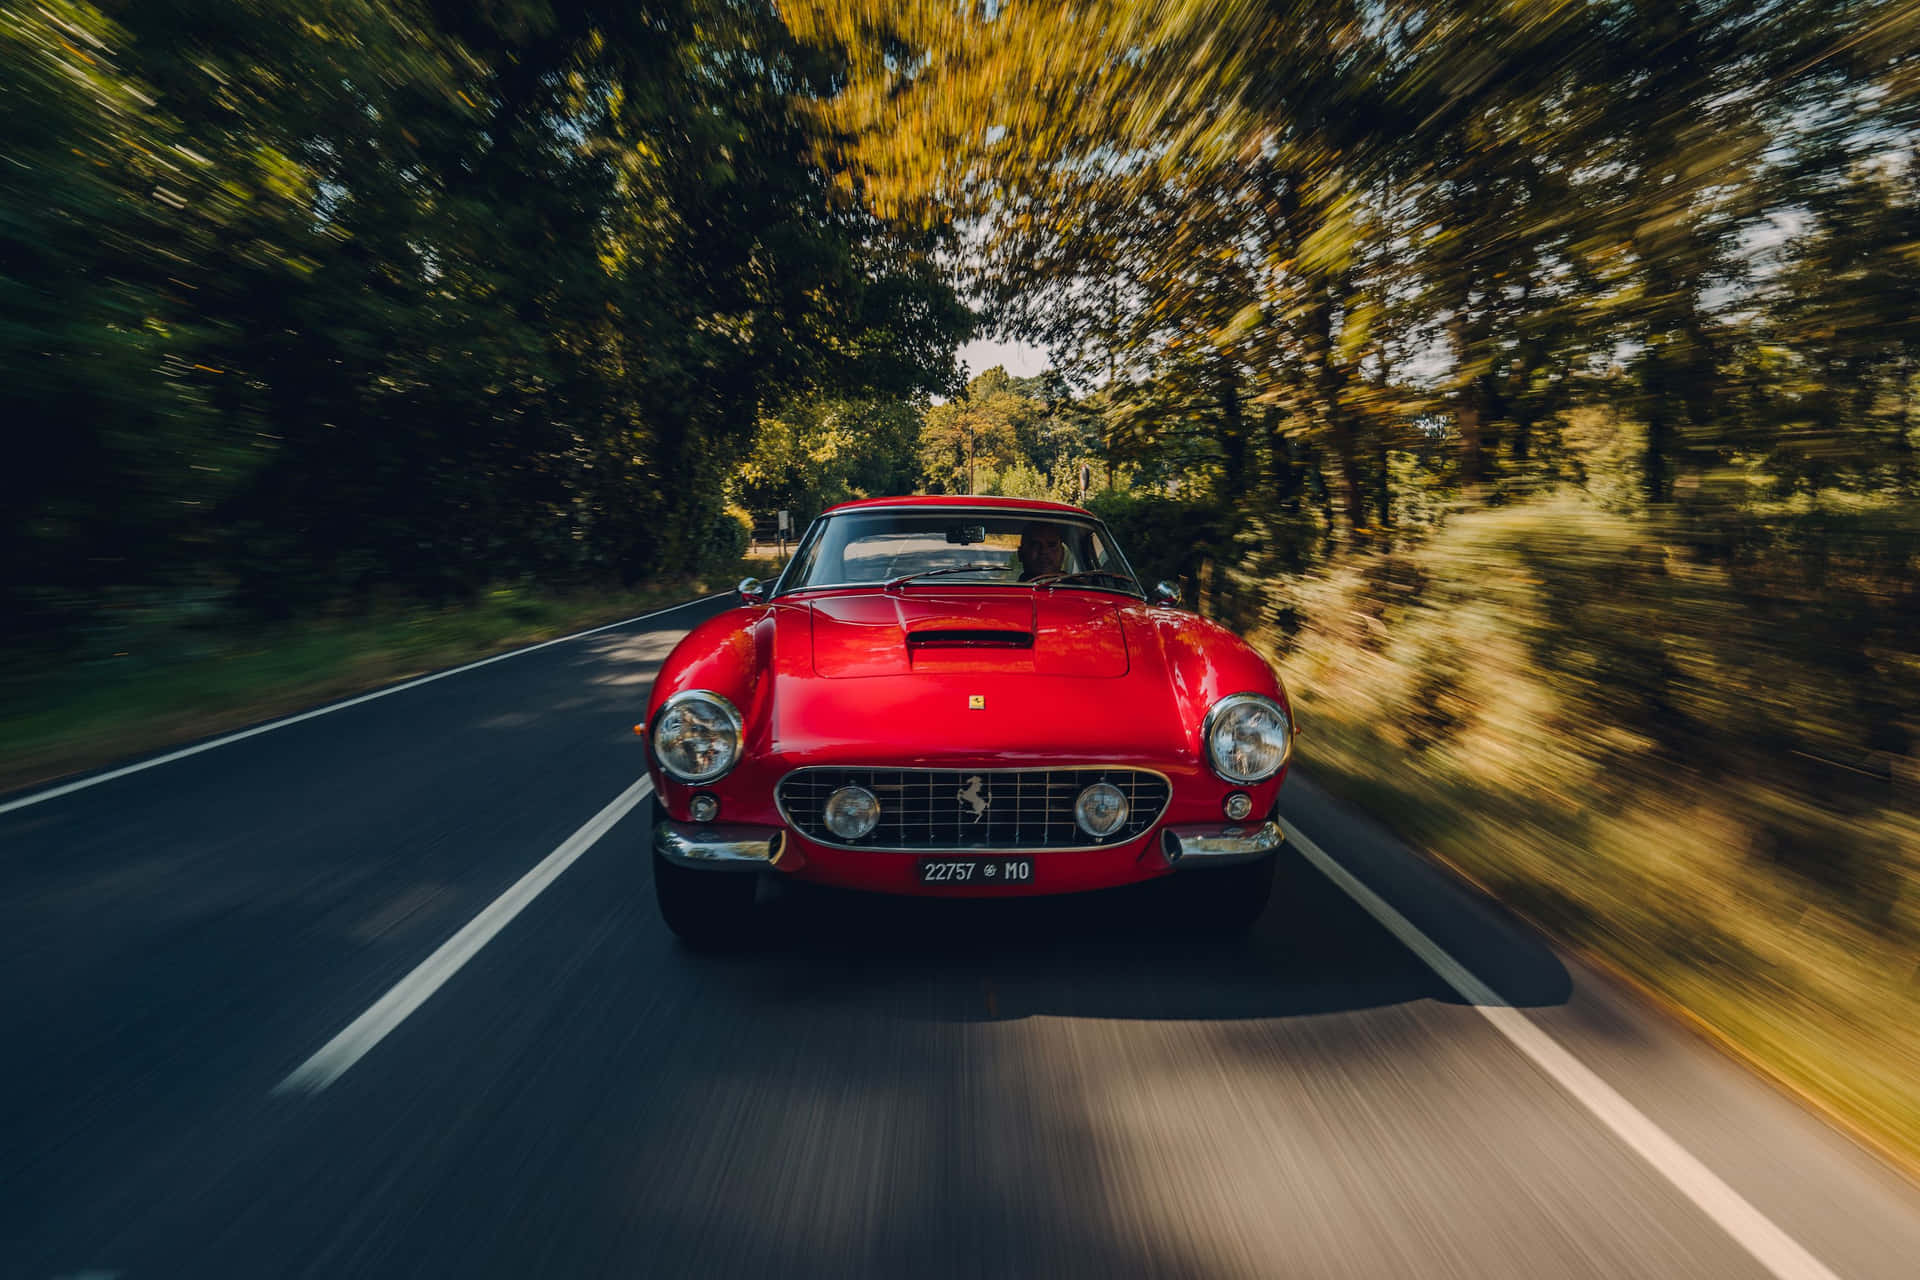 Driving in Style - A classic Ferrari on the open road Wallpaper